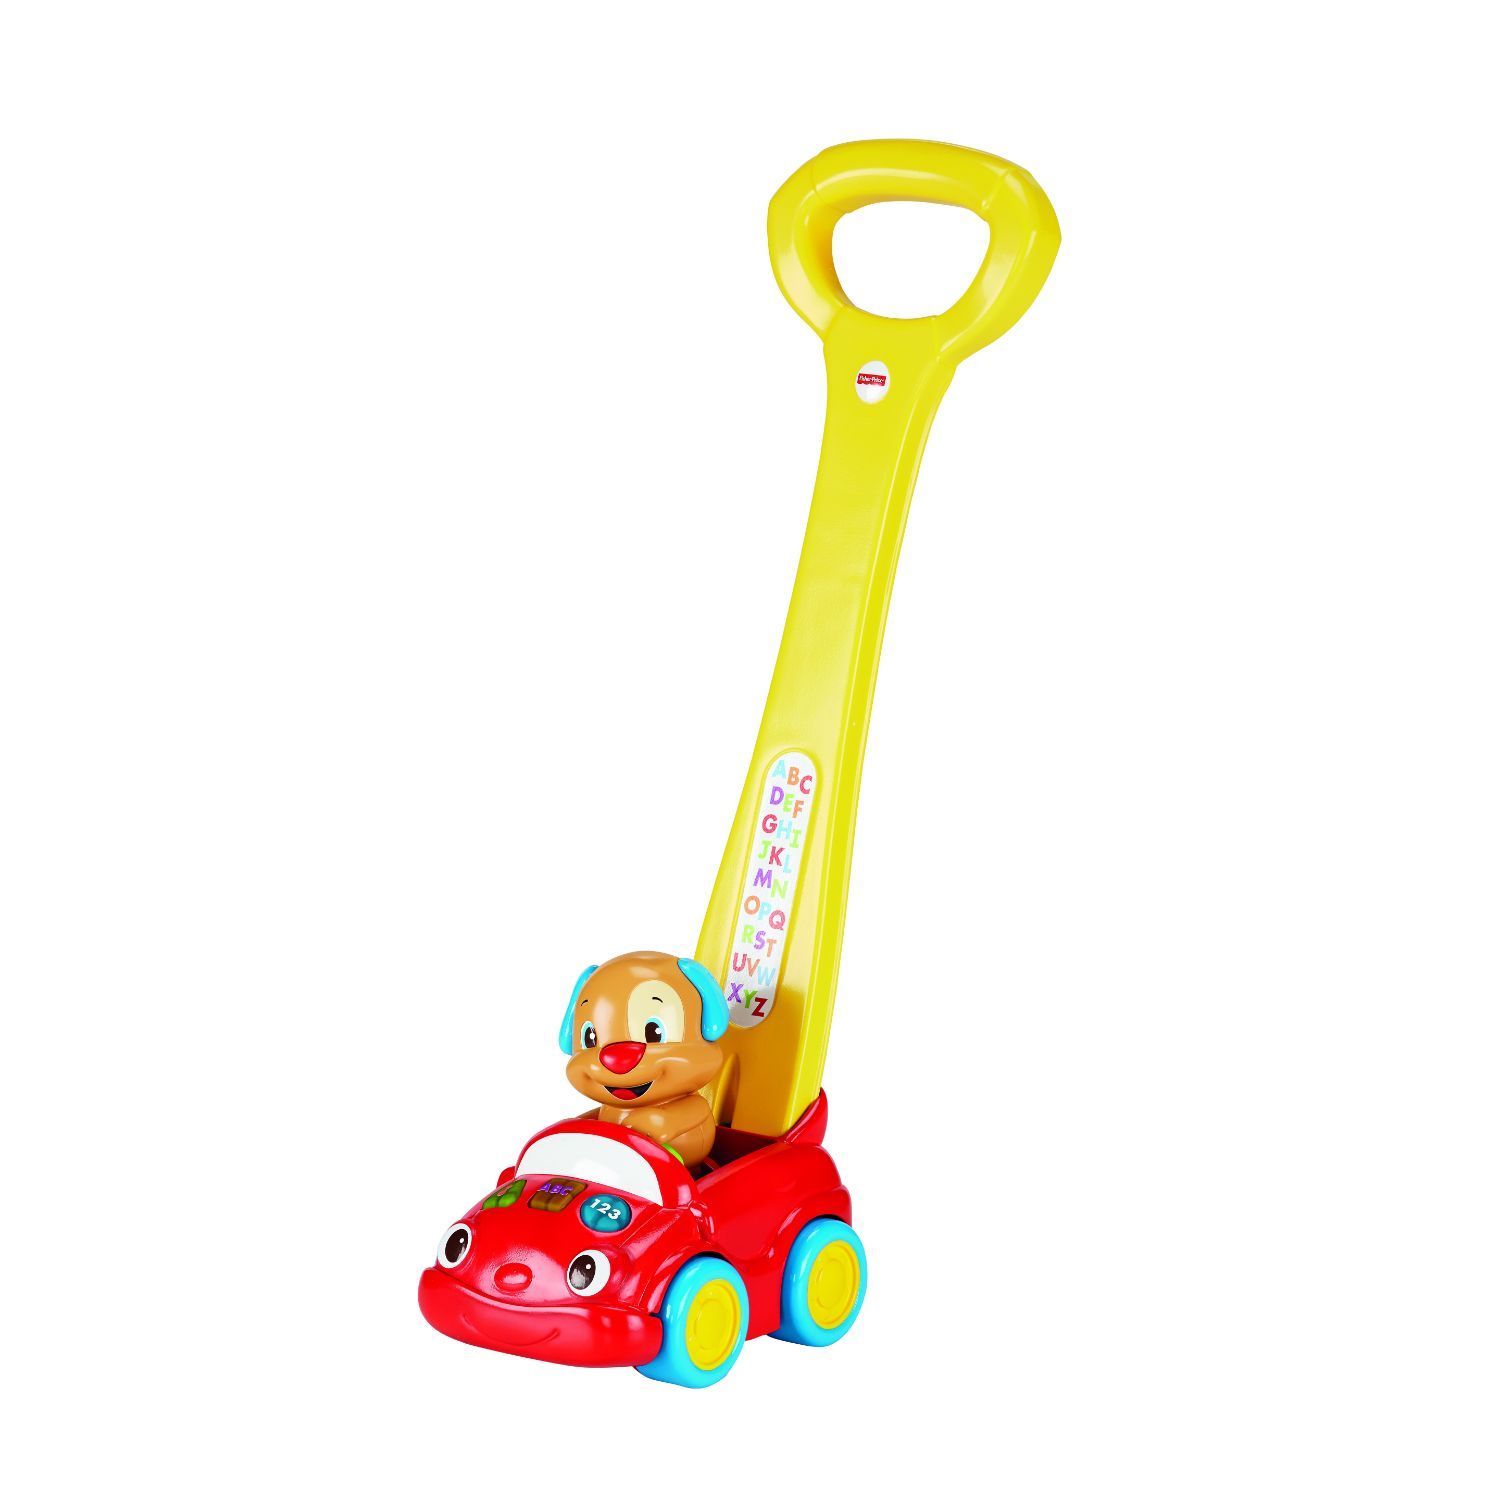 fisher price smart stages lawn mower